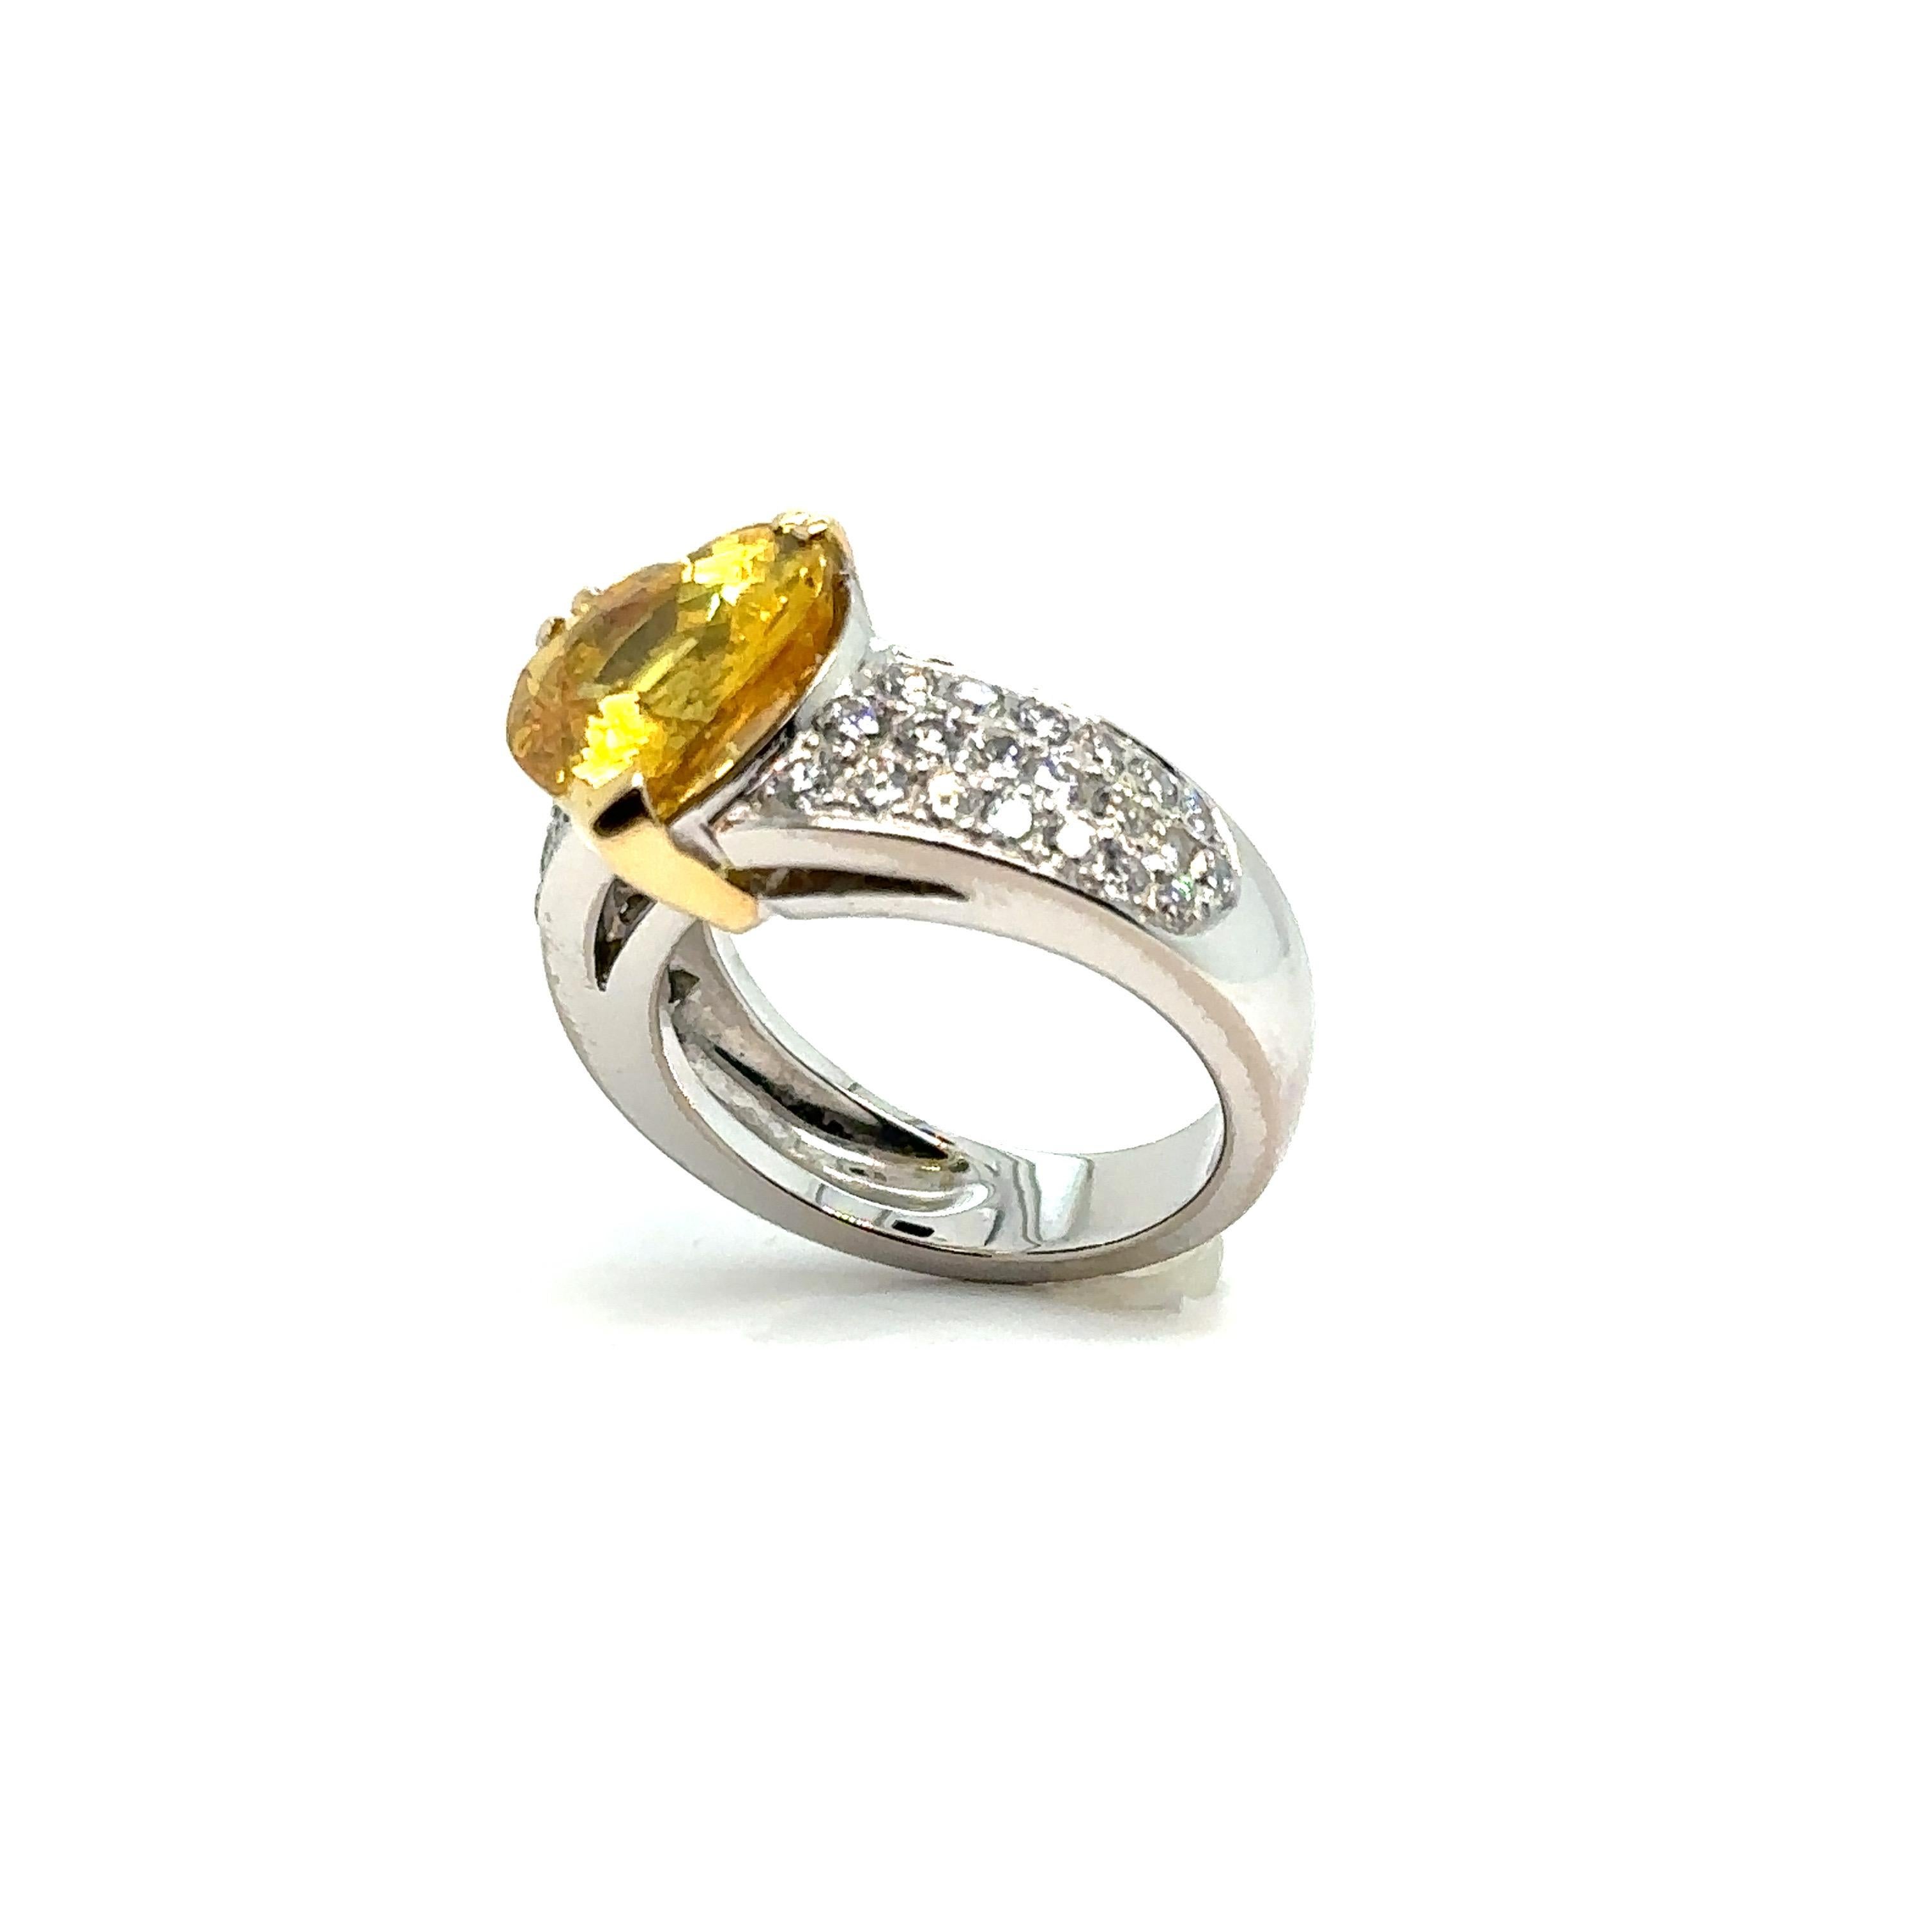 French Ring, Yellow Sapphire Heart, Pavage Diamonds 4